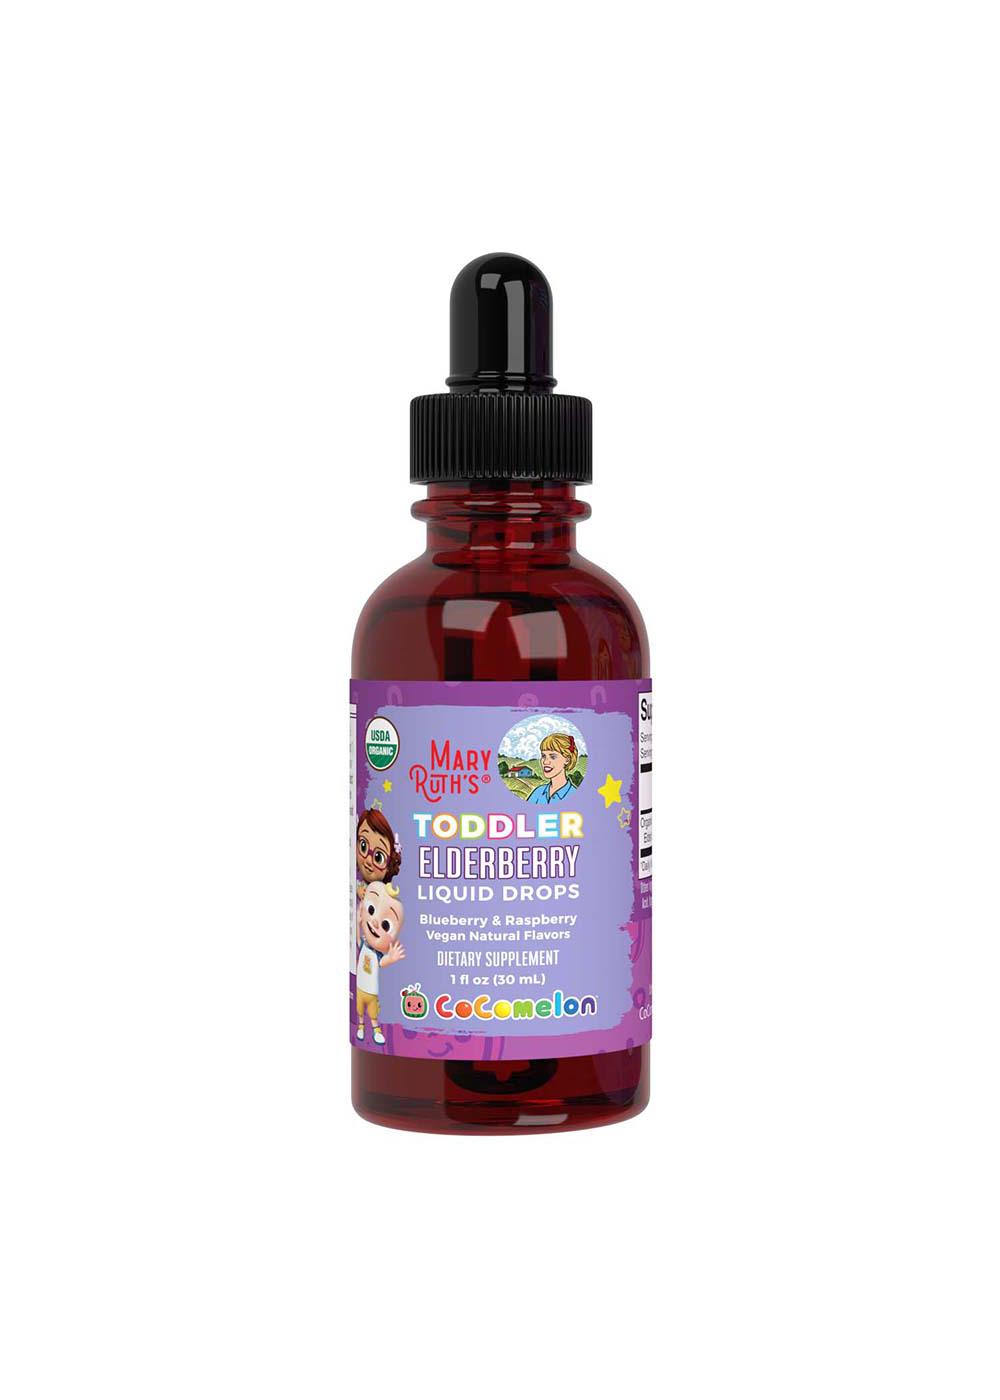 Mary Ruth's Toddler Elderberry Liquid Drops - Blueberry & Raspberry; image 2 of 2